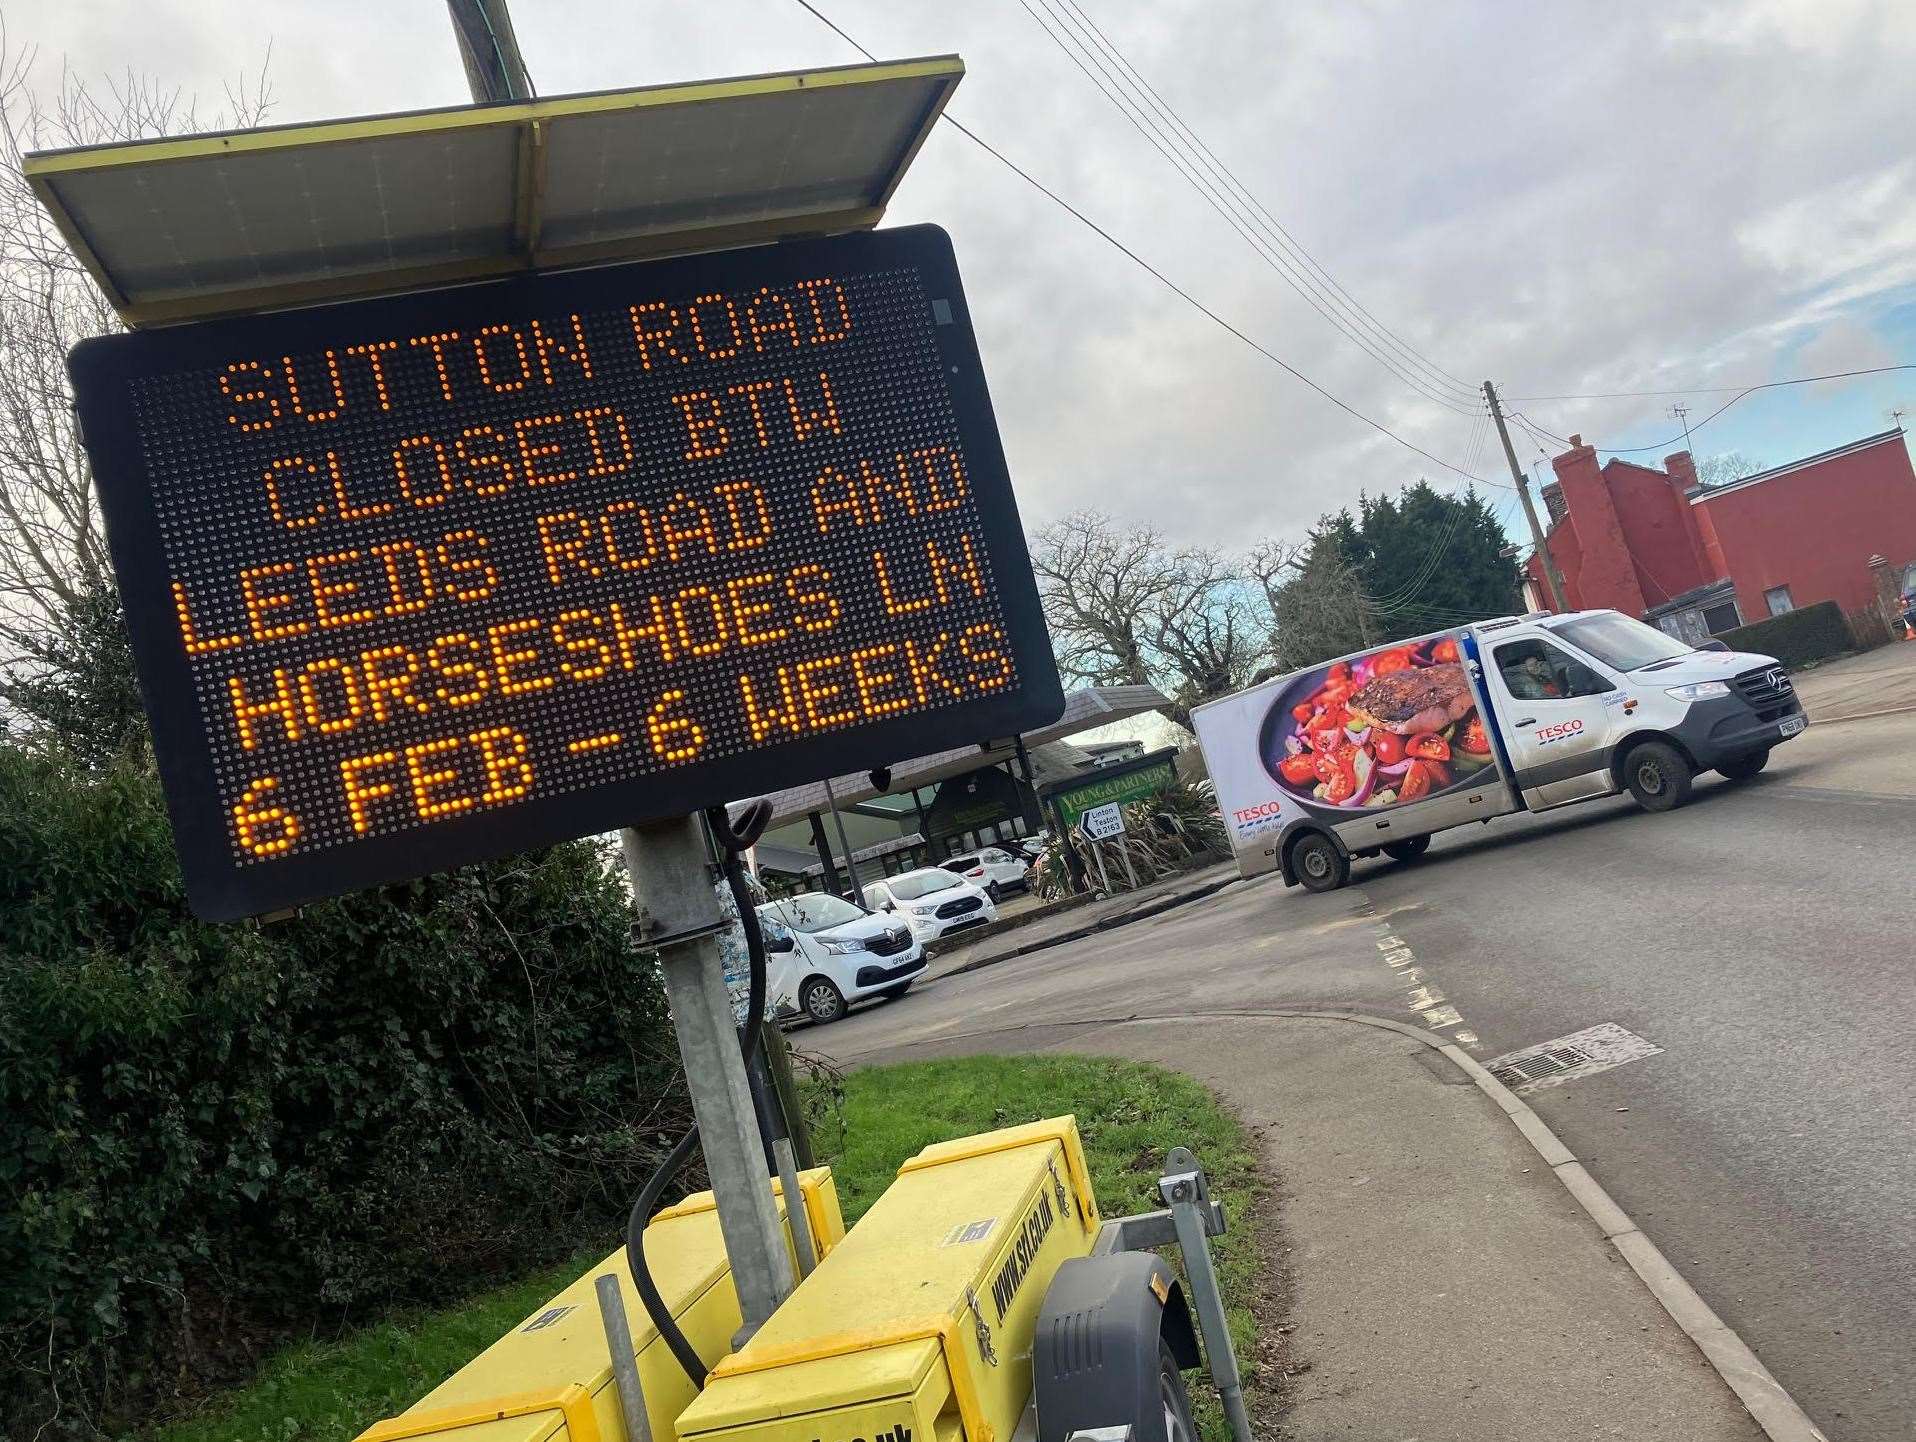 A sign on the A274 notifying residents of a road closure for six weeks